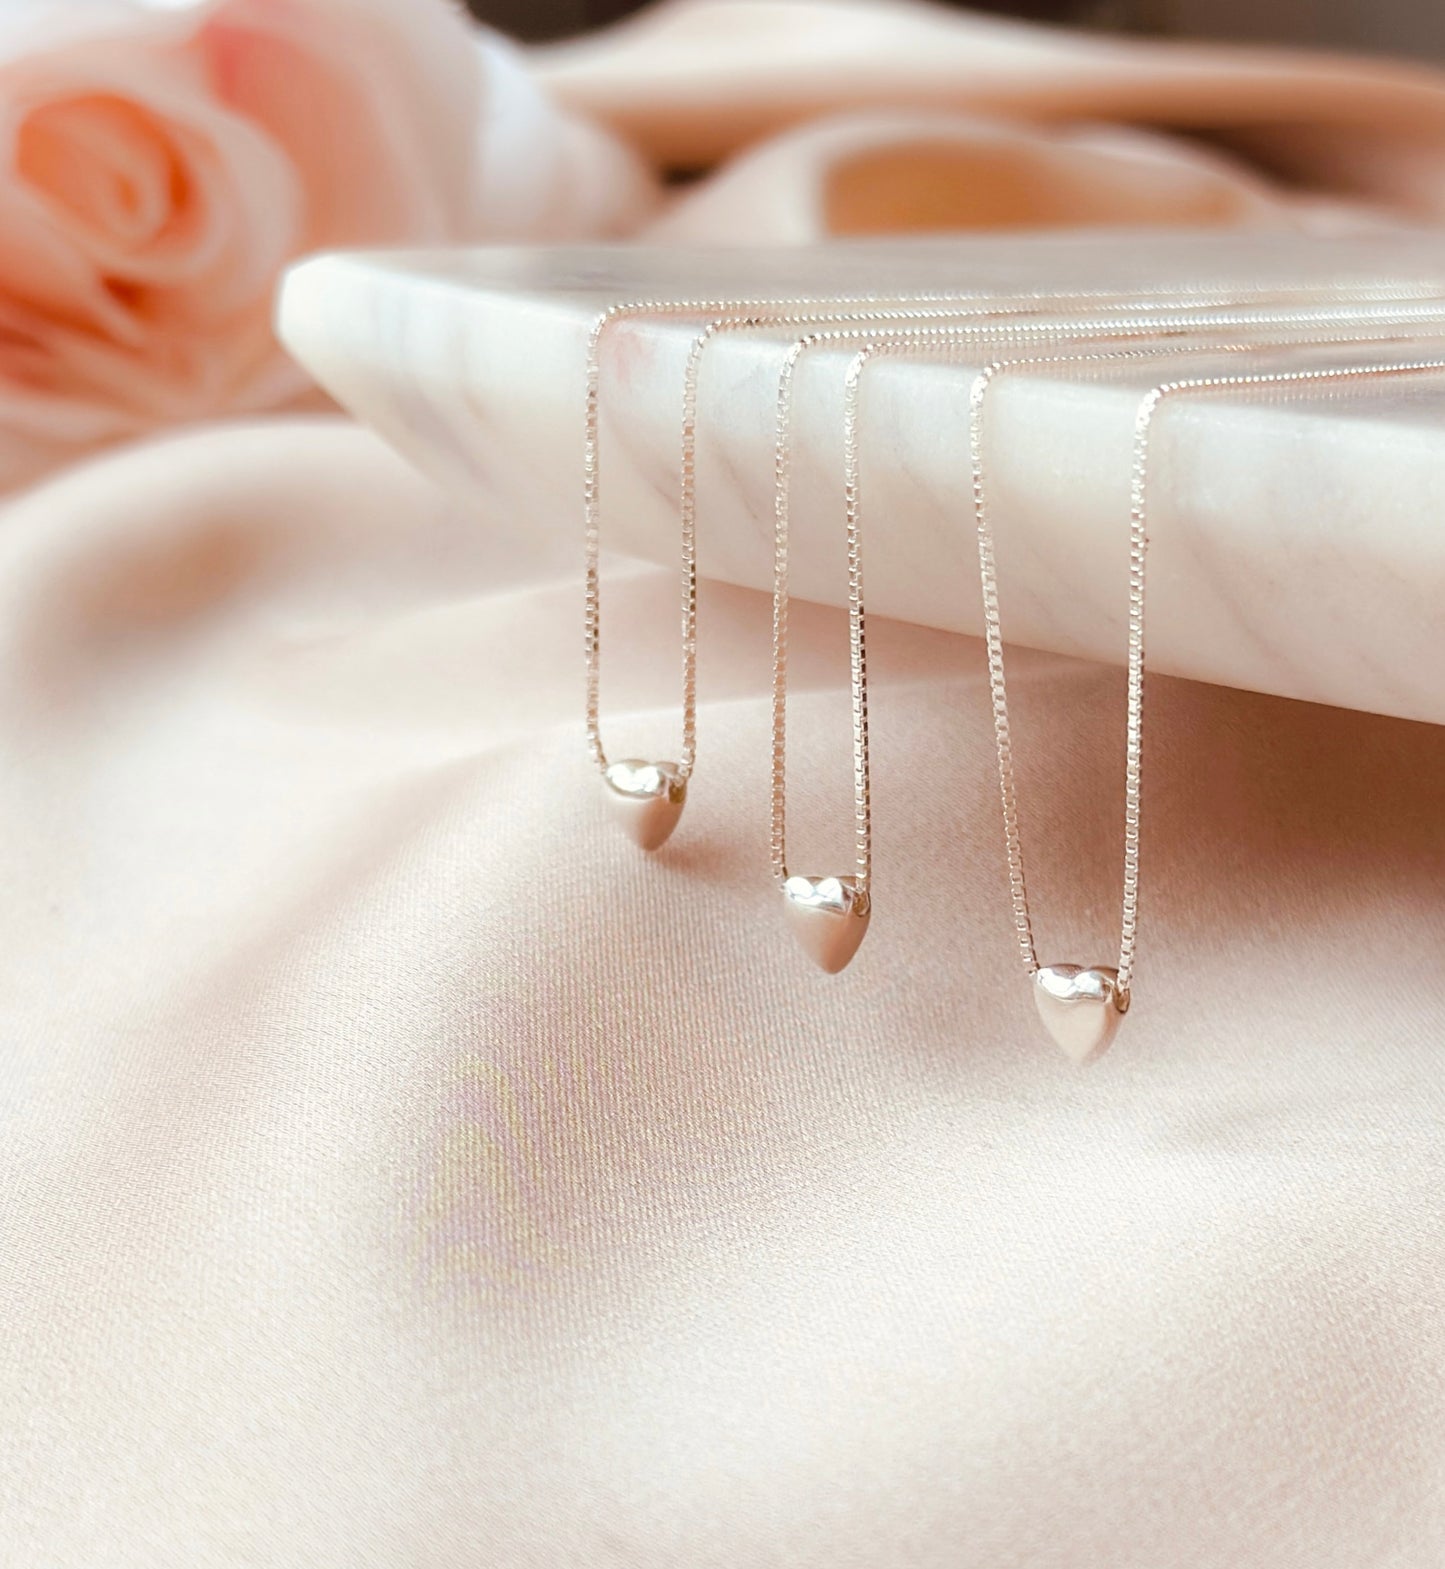 The Dainty Heart Necklace